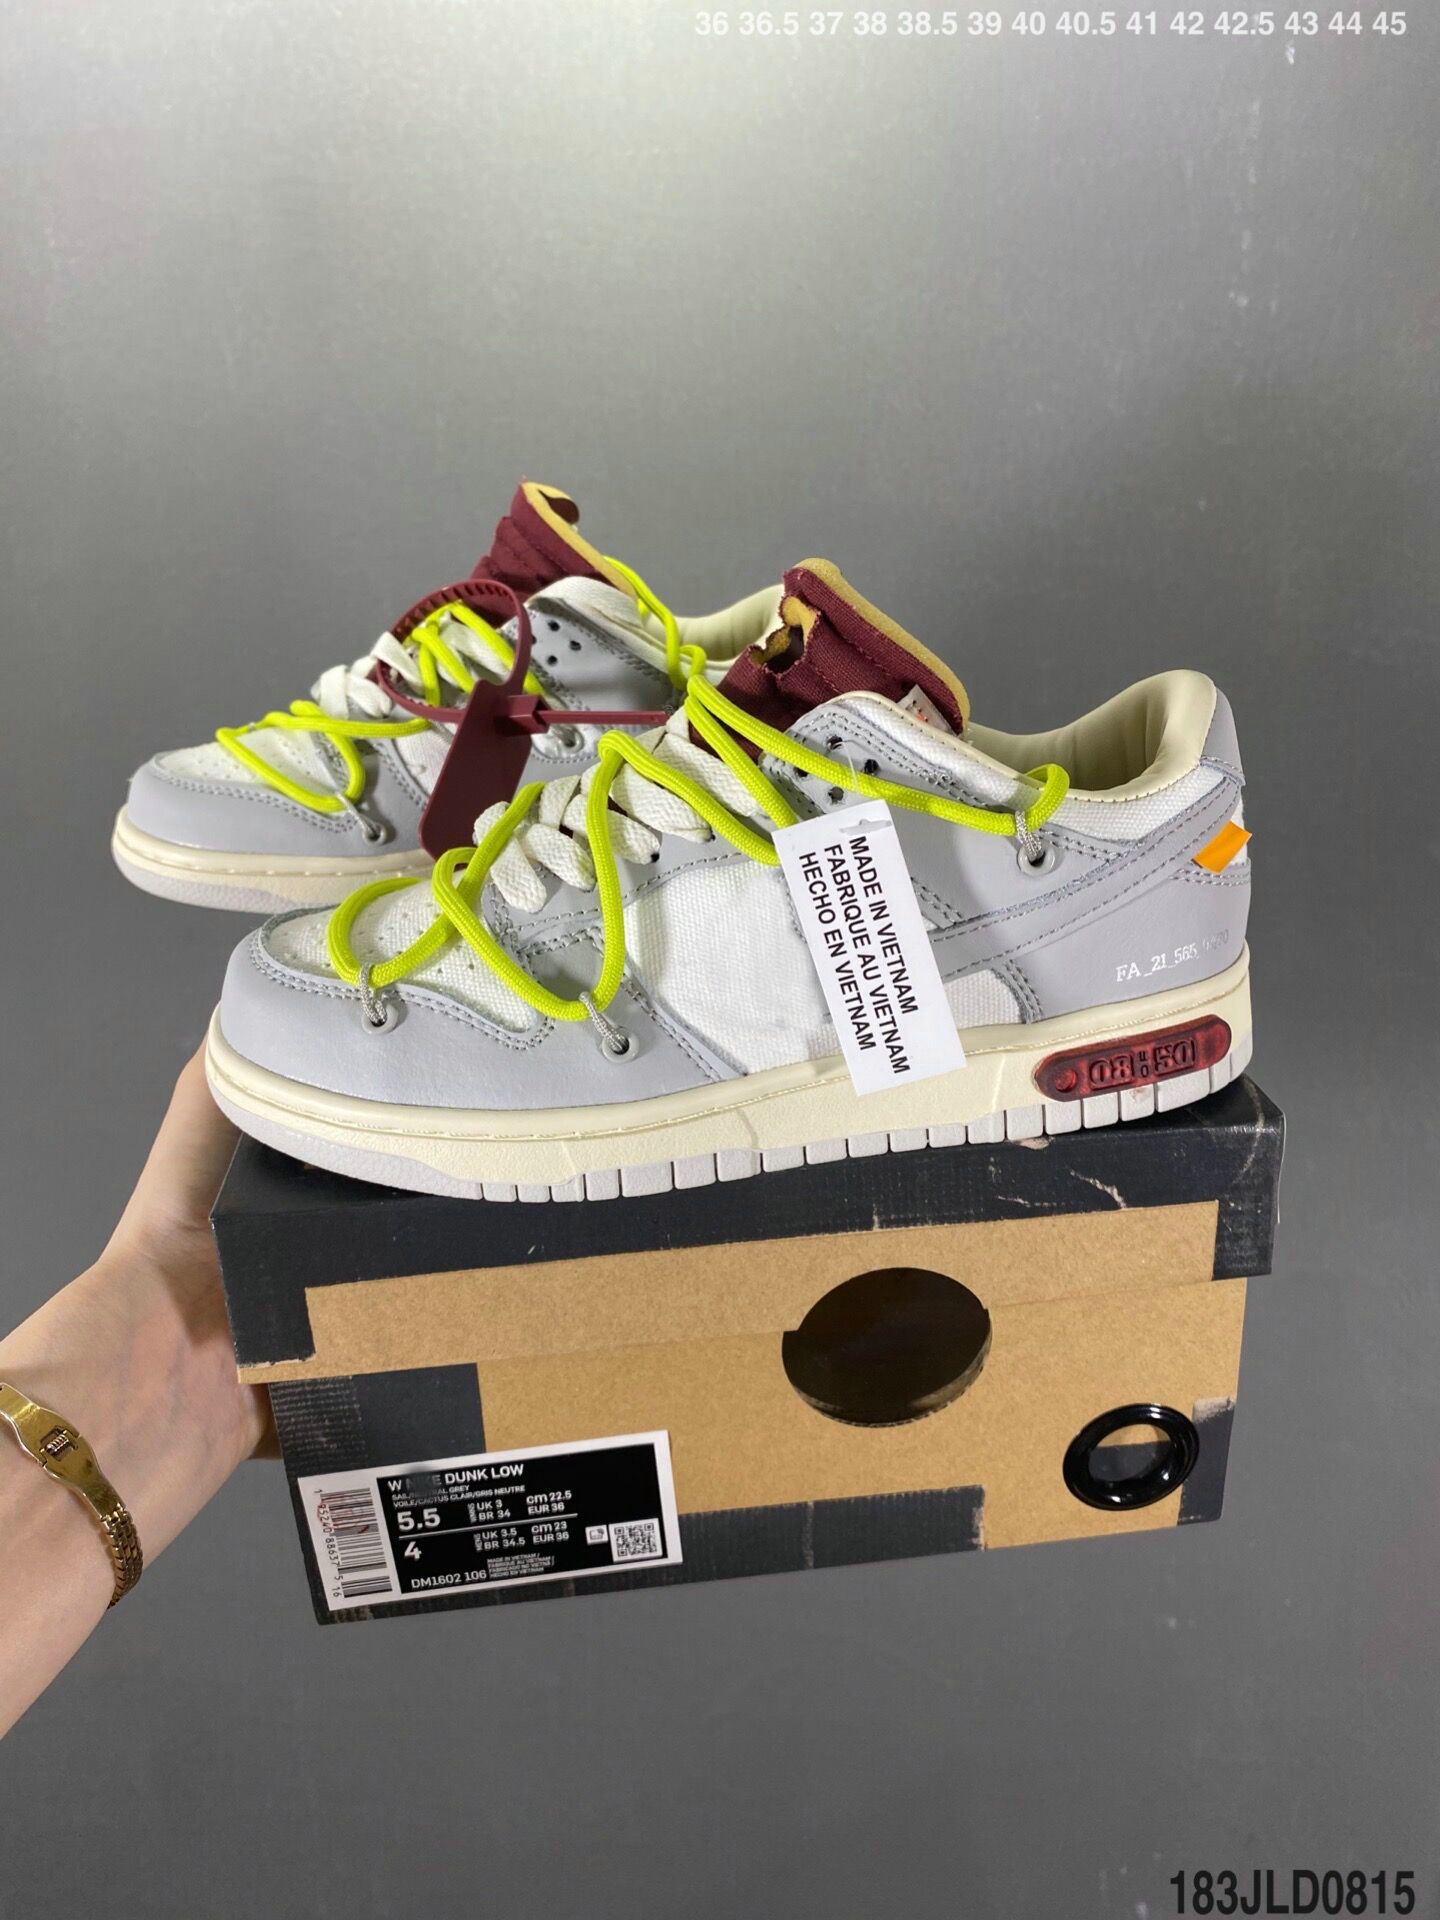 

New color Womens Low Dunks Chunky Dunky White Mens x Casual Shoes Civilist Kasina Bears Travis Scotts off Skateboards Sports sb Sneakers 2021 Trainers with box, Grey